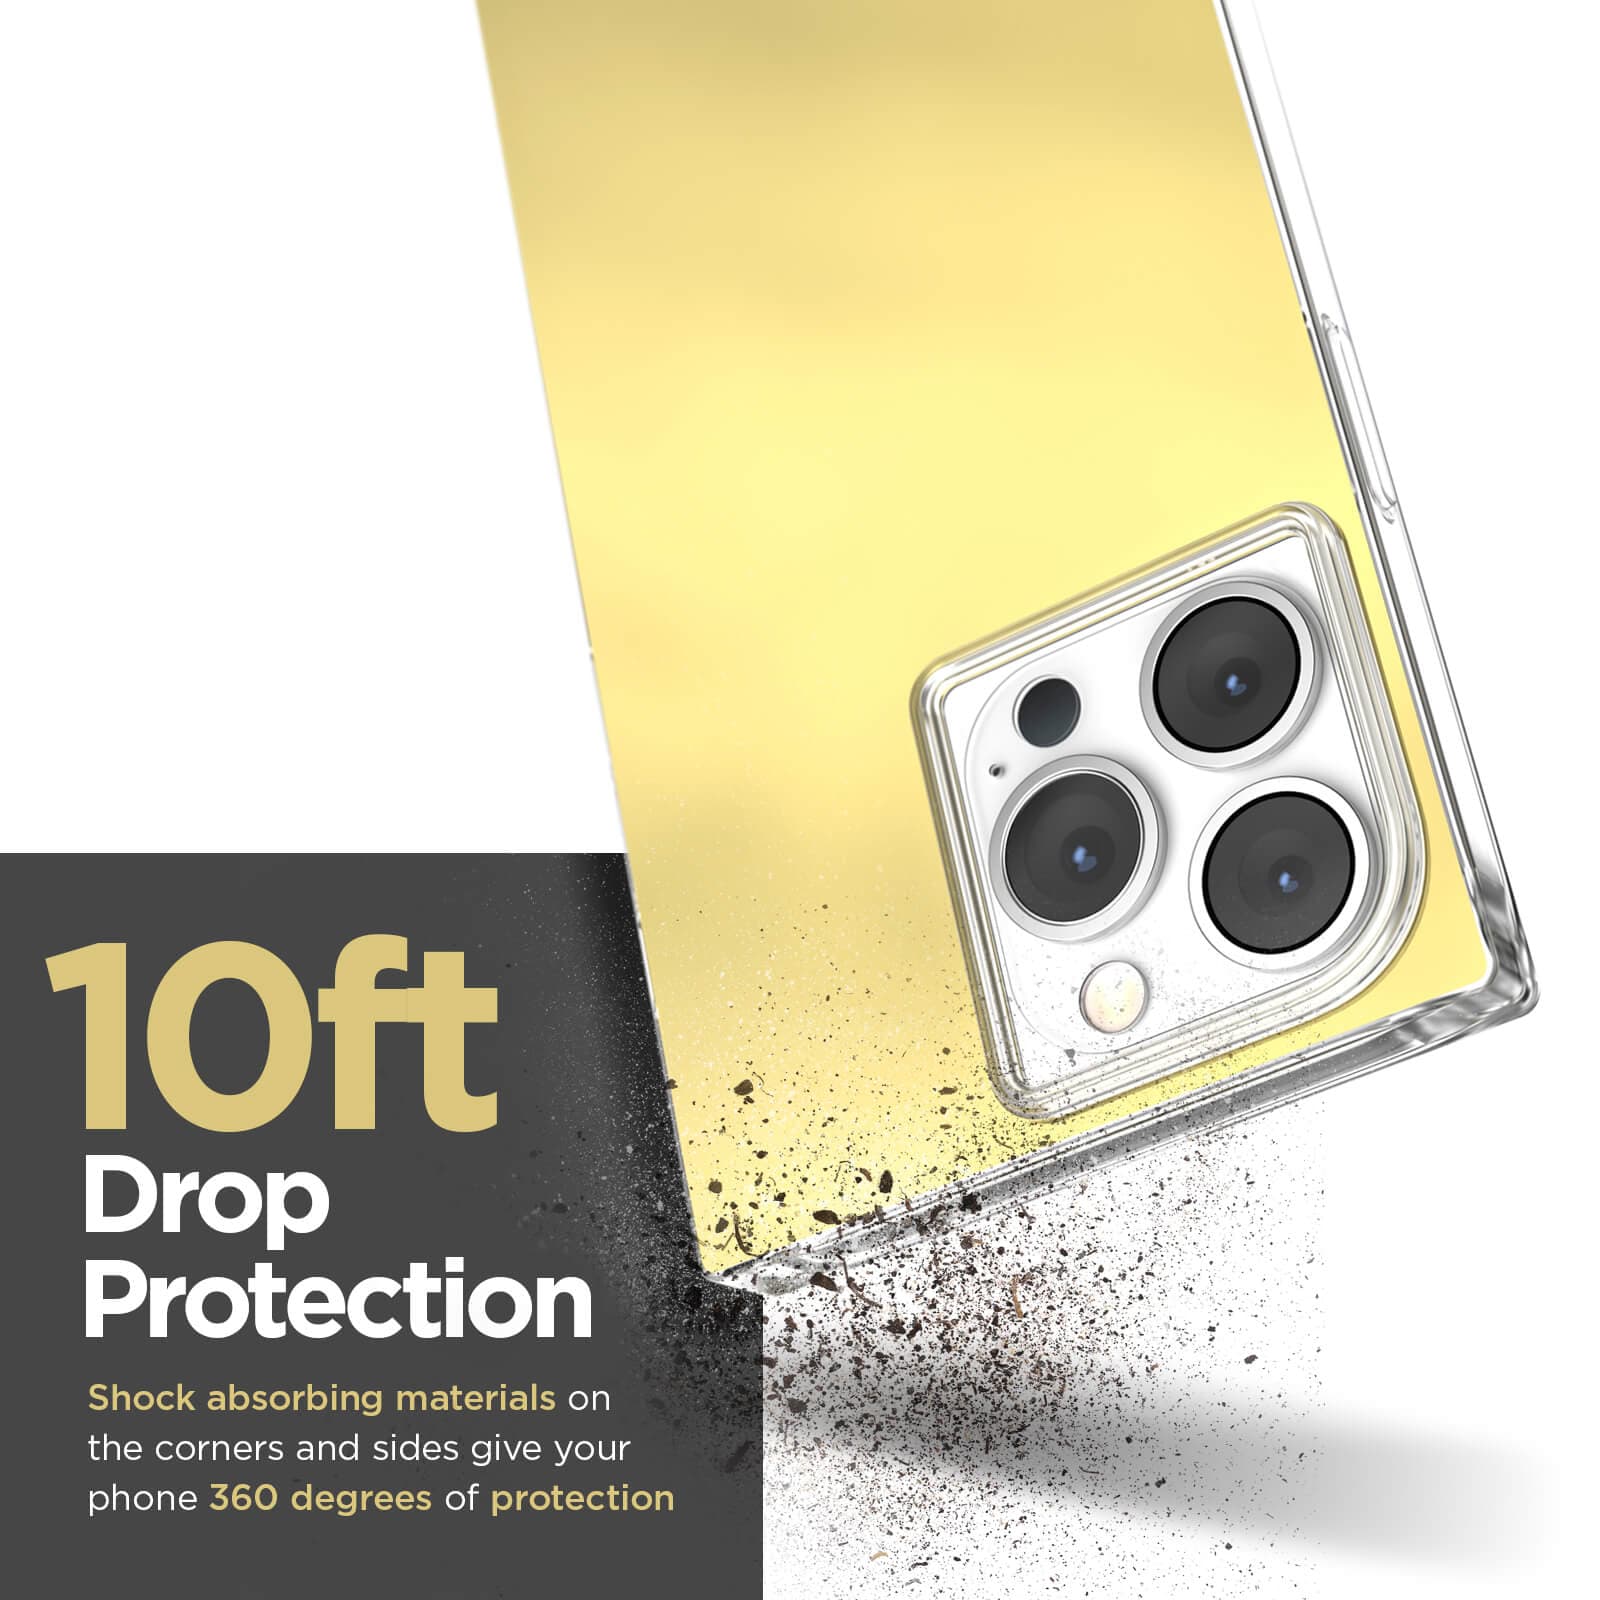 10ft Drop Protection shock absorbing materials on the corners and sides give your phone 360 degrees of protection. color::Gold